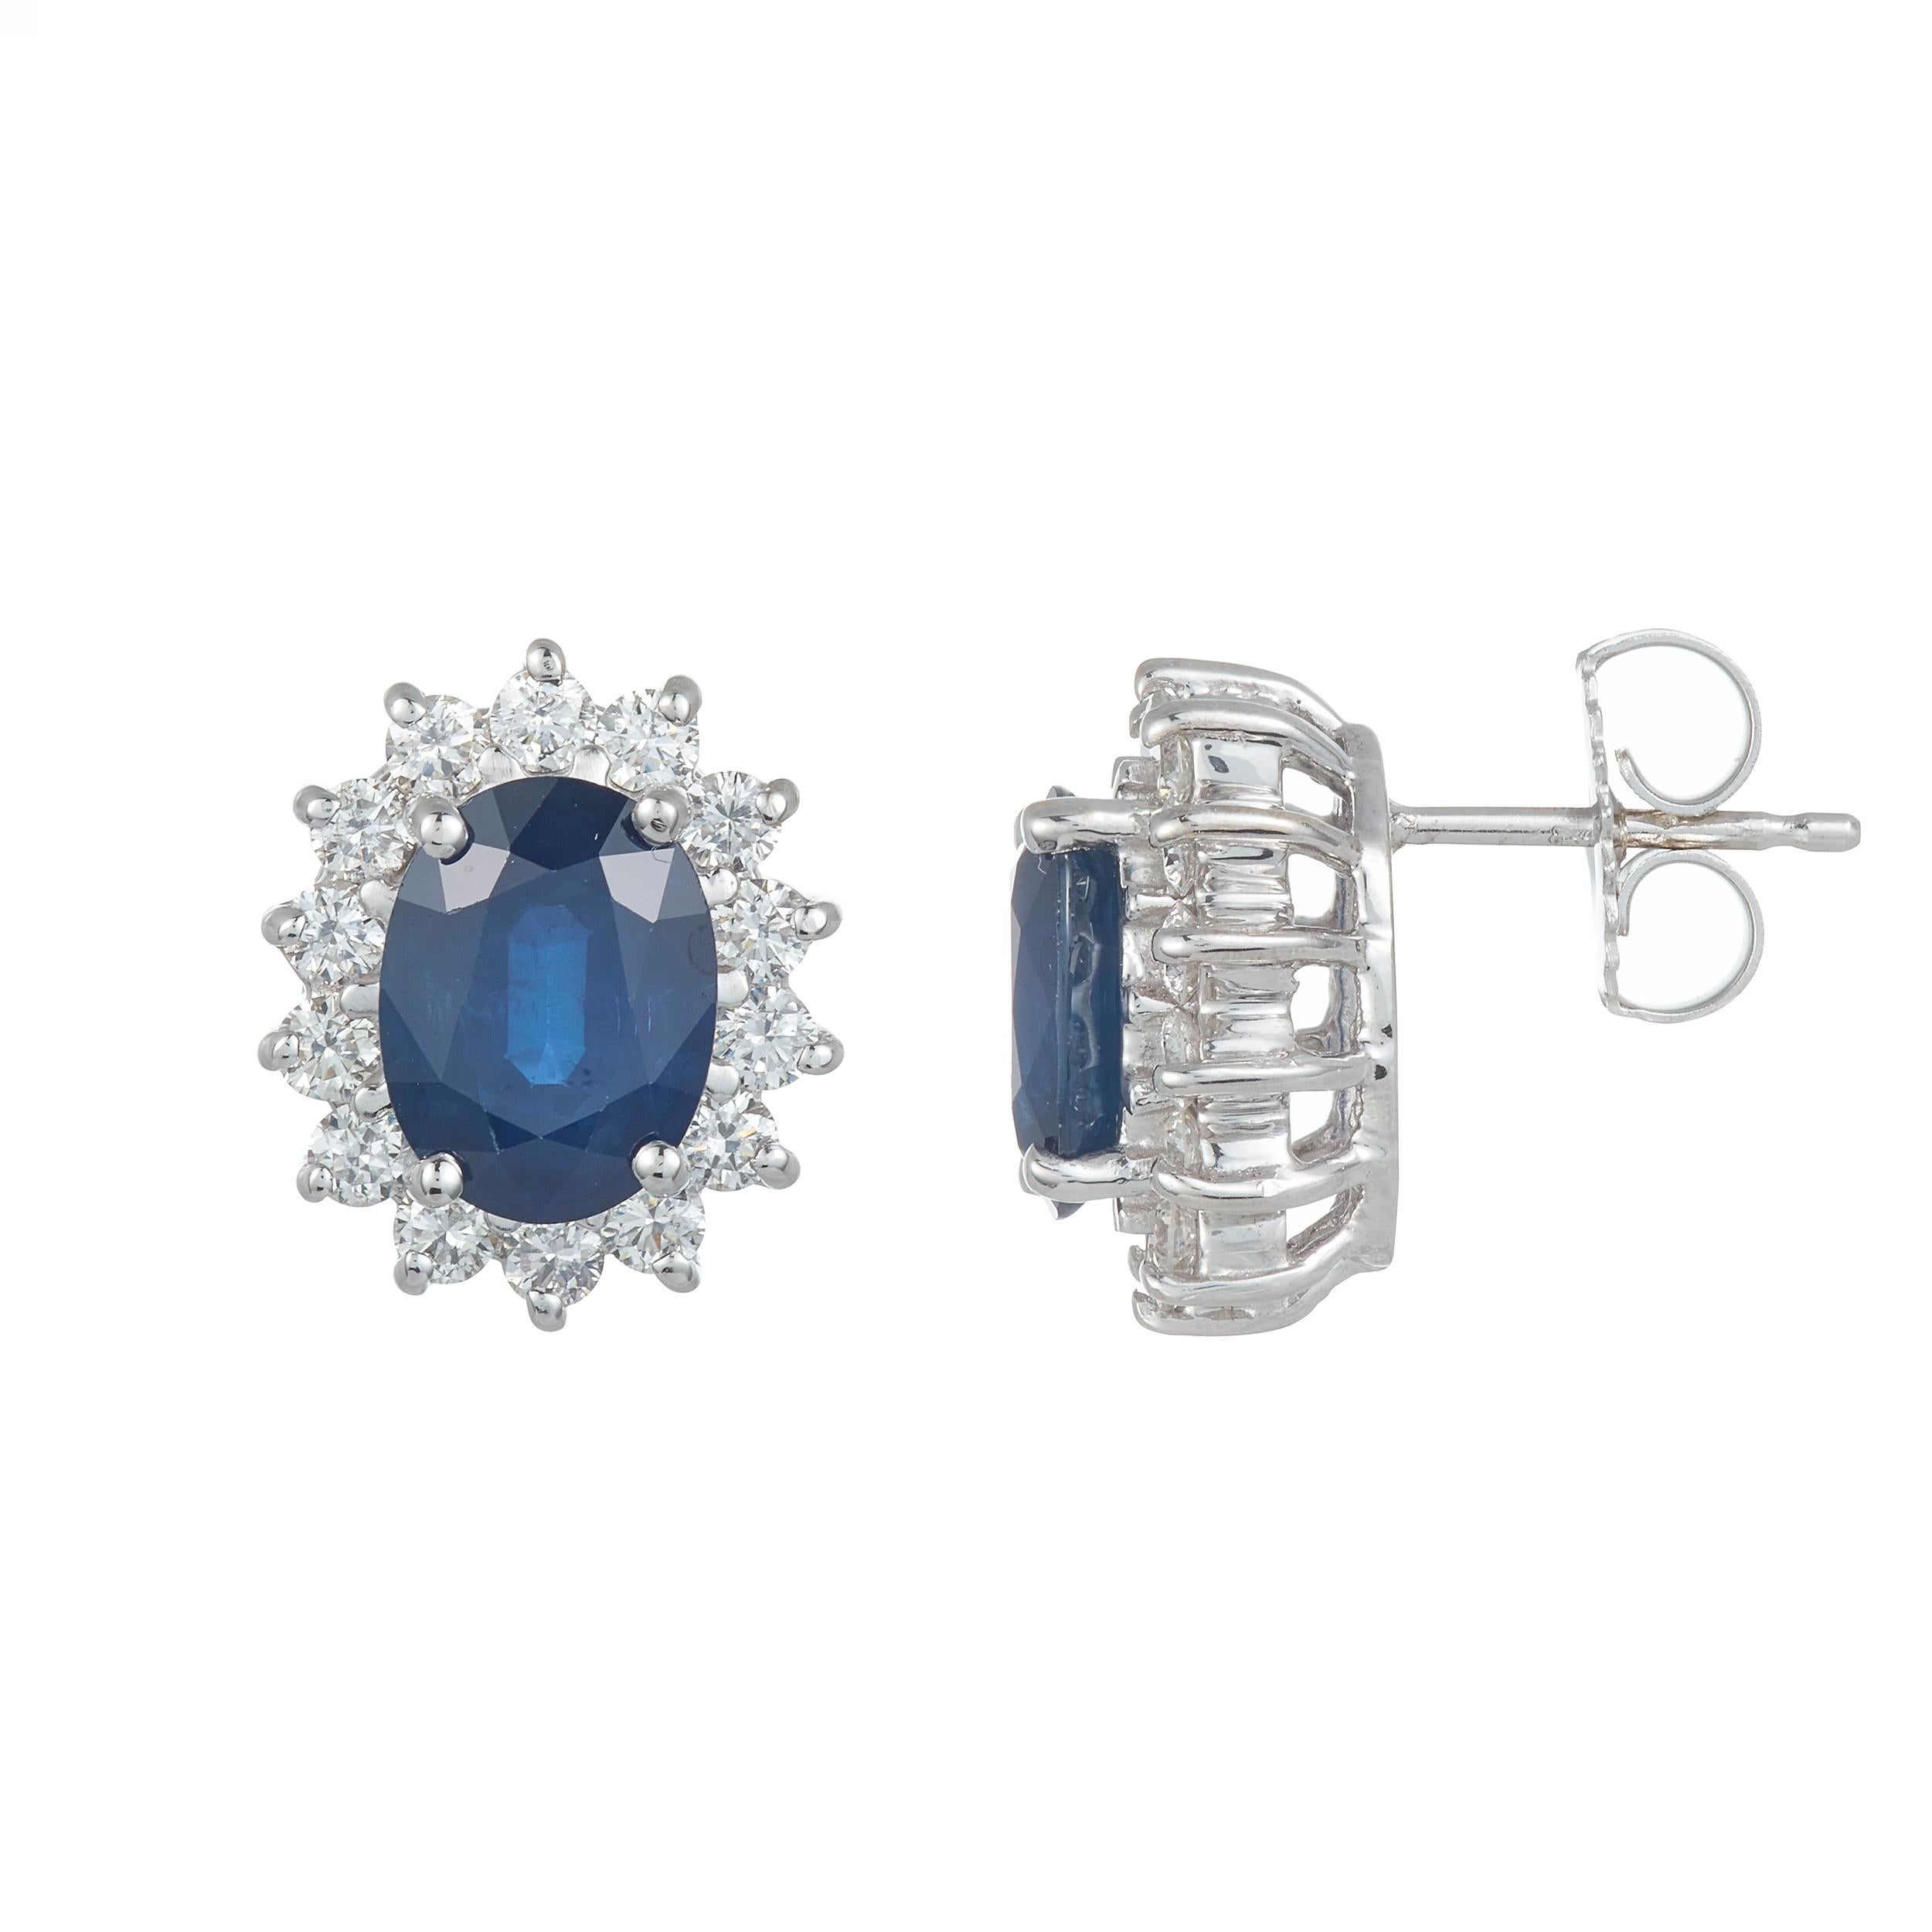 Stones: 2 Blue Sapphires at 3.50 Carats Total Weight
Accent Stones: 28 Round Brilliant Diamond at 0.80 Carats Total Weight - Color- SI/ Clarity: H-I
Metal: 14K White Gold

Fine one-of-a-kind craftsmanship meets incredible quality in this